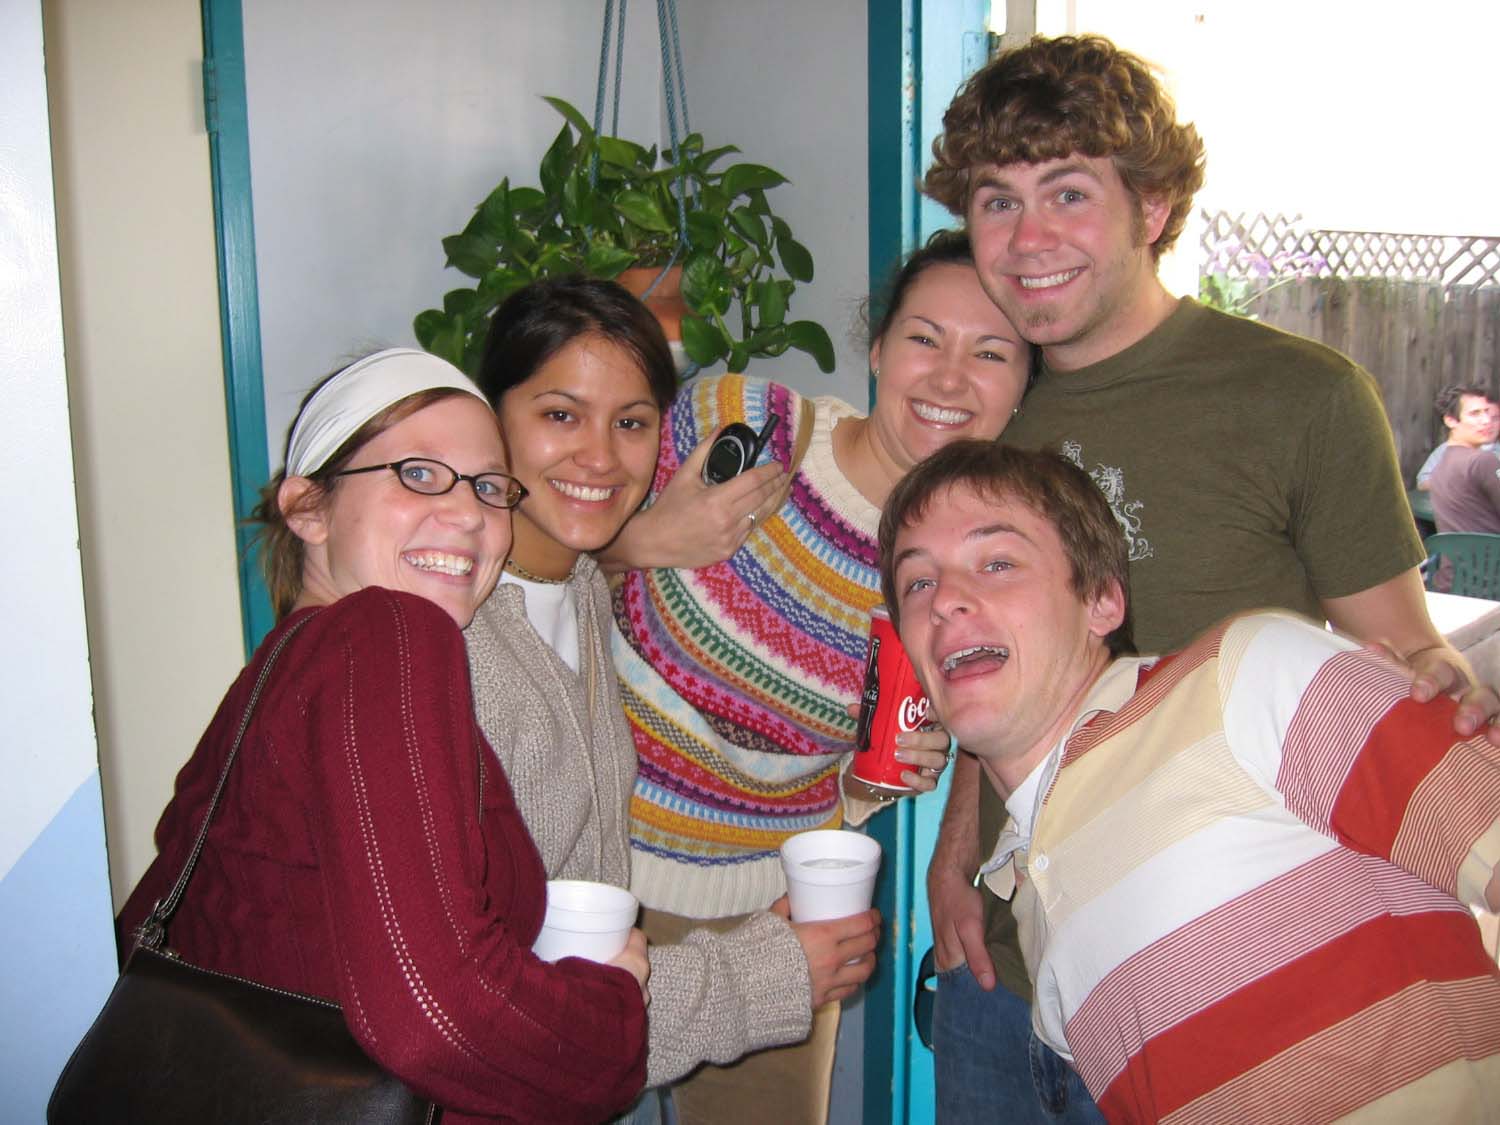 Some frieds from My Newport Beach Mission Trip in Summer 2003